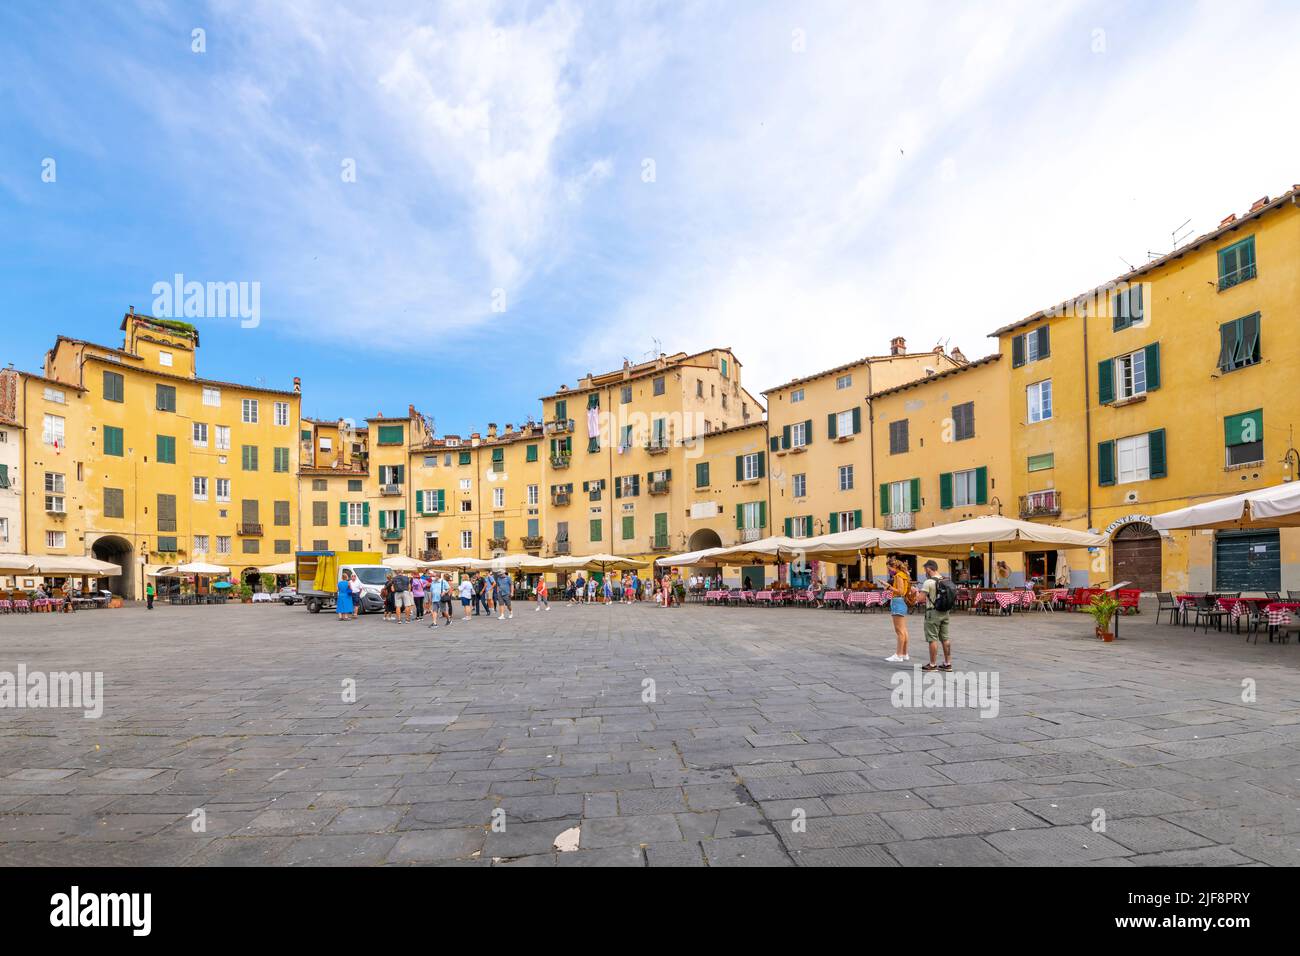 Sidewalk cafes inside the the Piazza del Anfiteatro, the ancient amphitheater in the Tuscan walled town of Lucca, Italy. Stock Photo